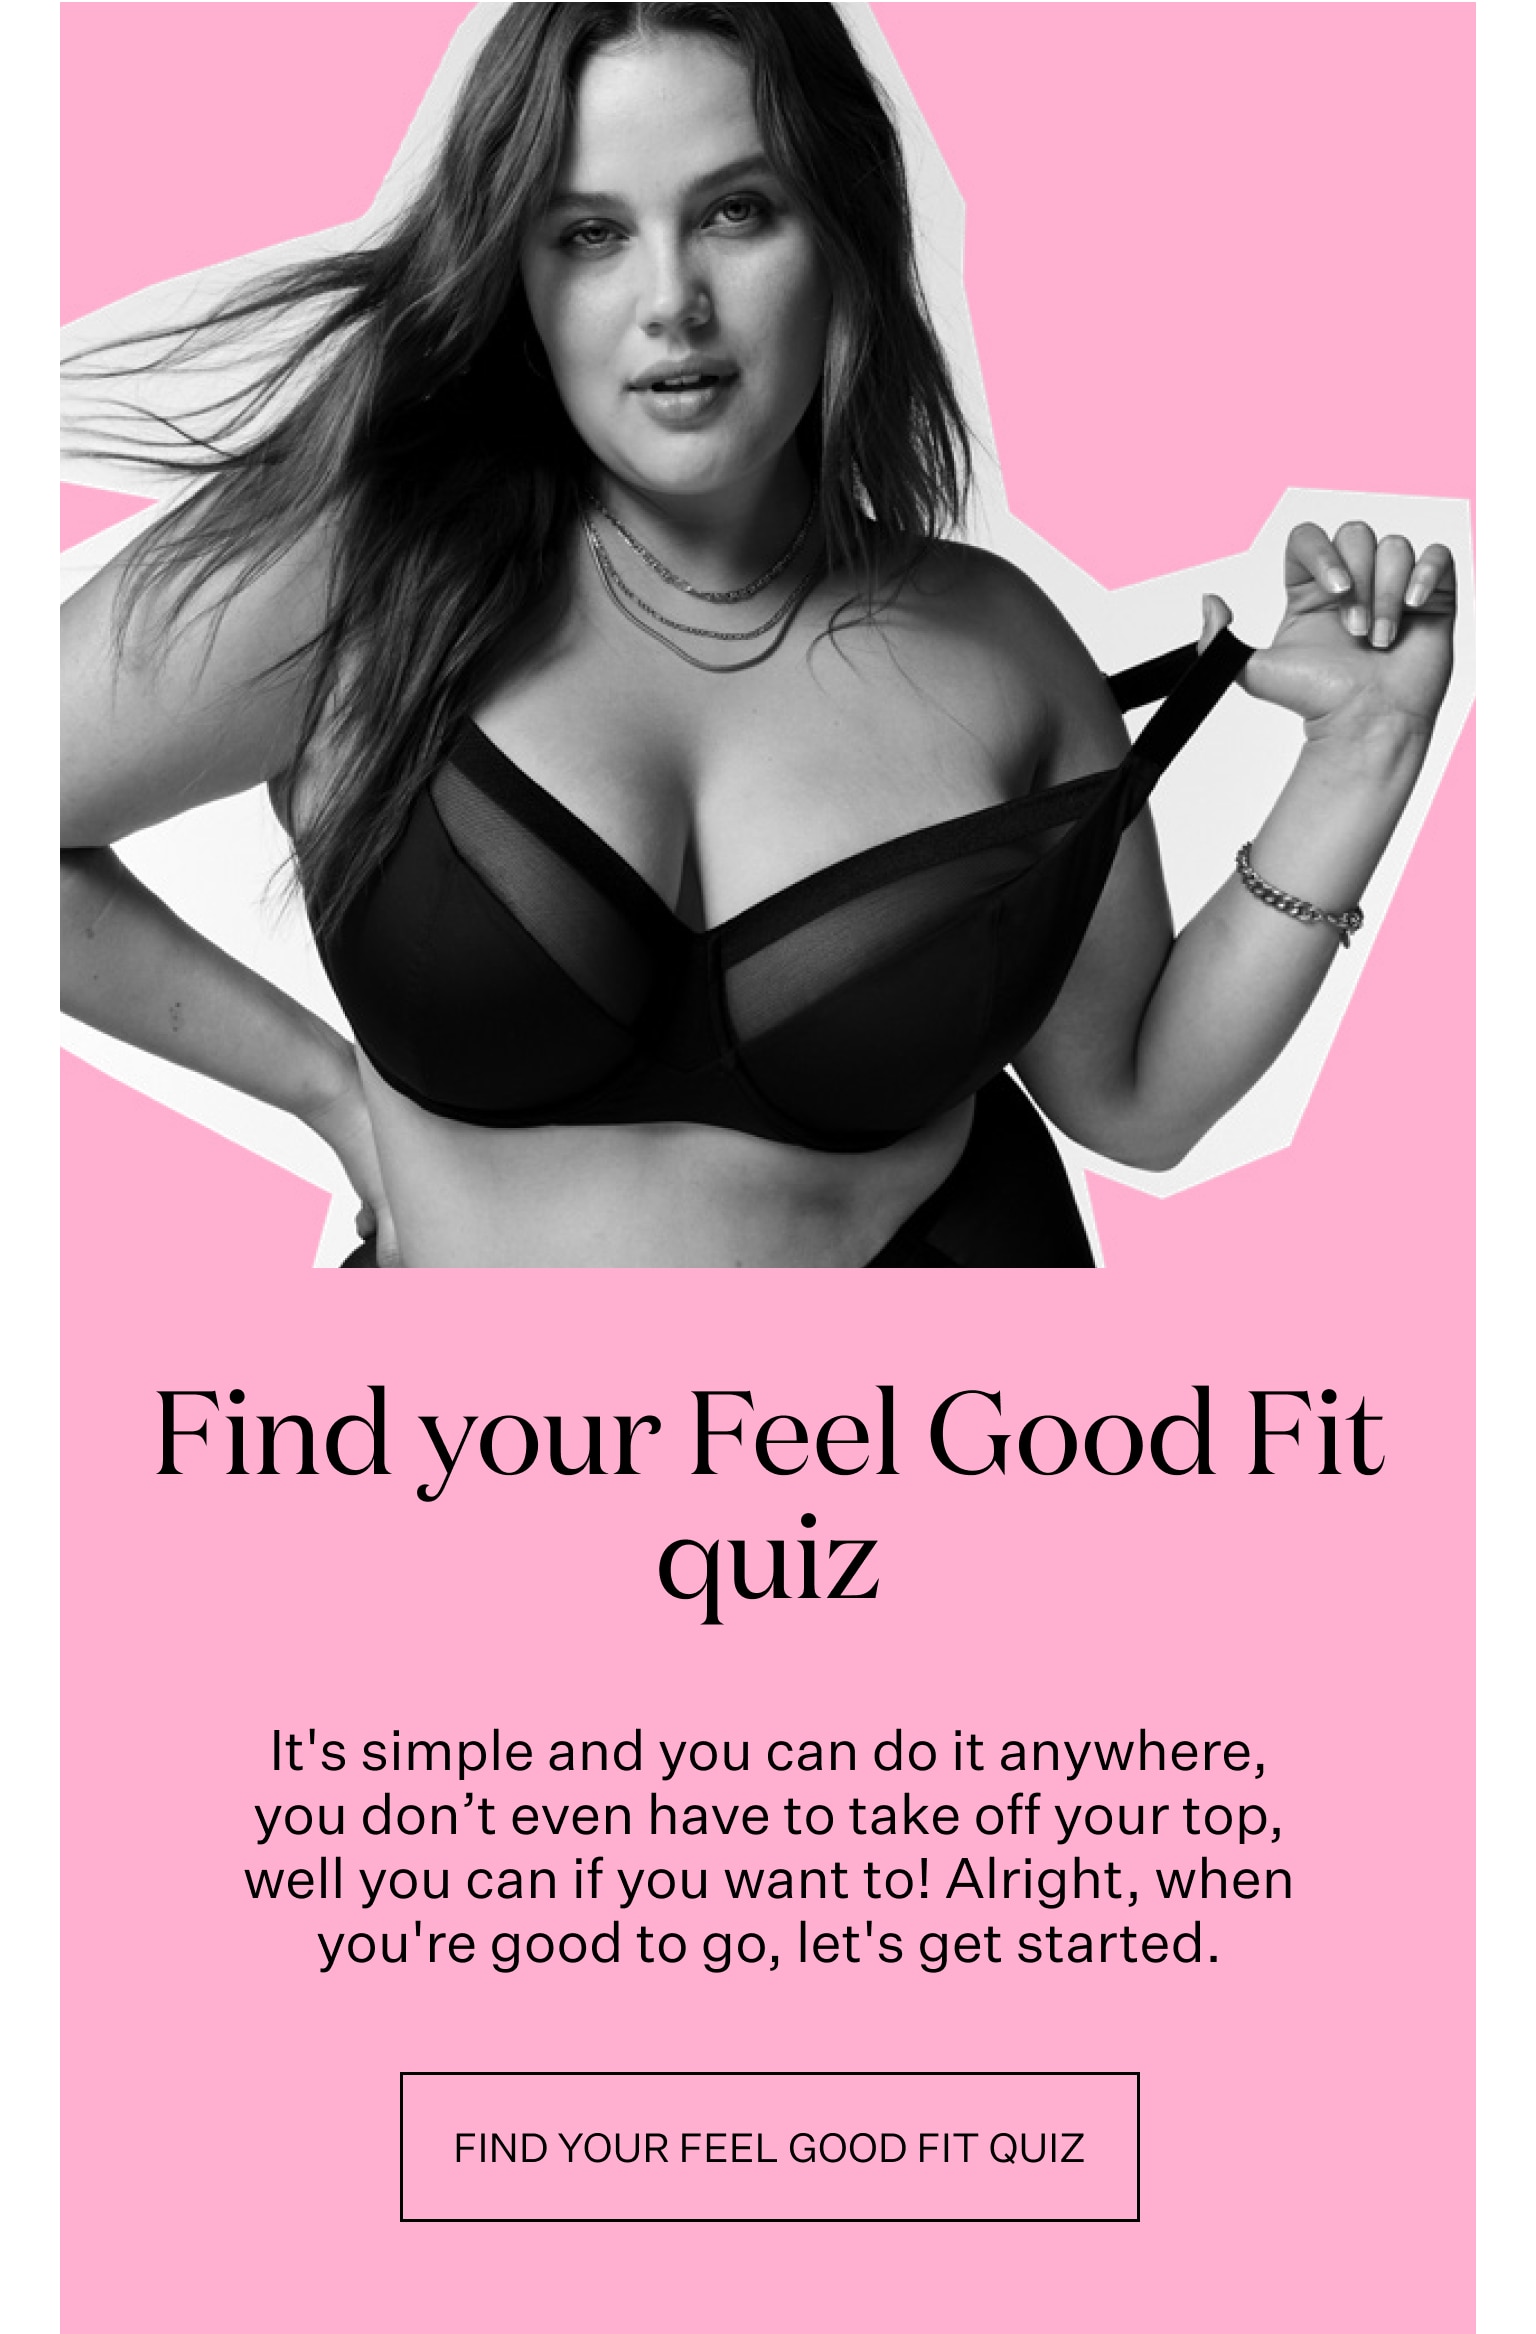 Find your Feel Good Fit quiz